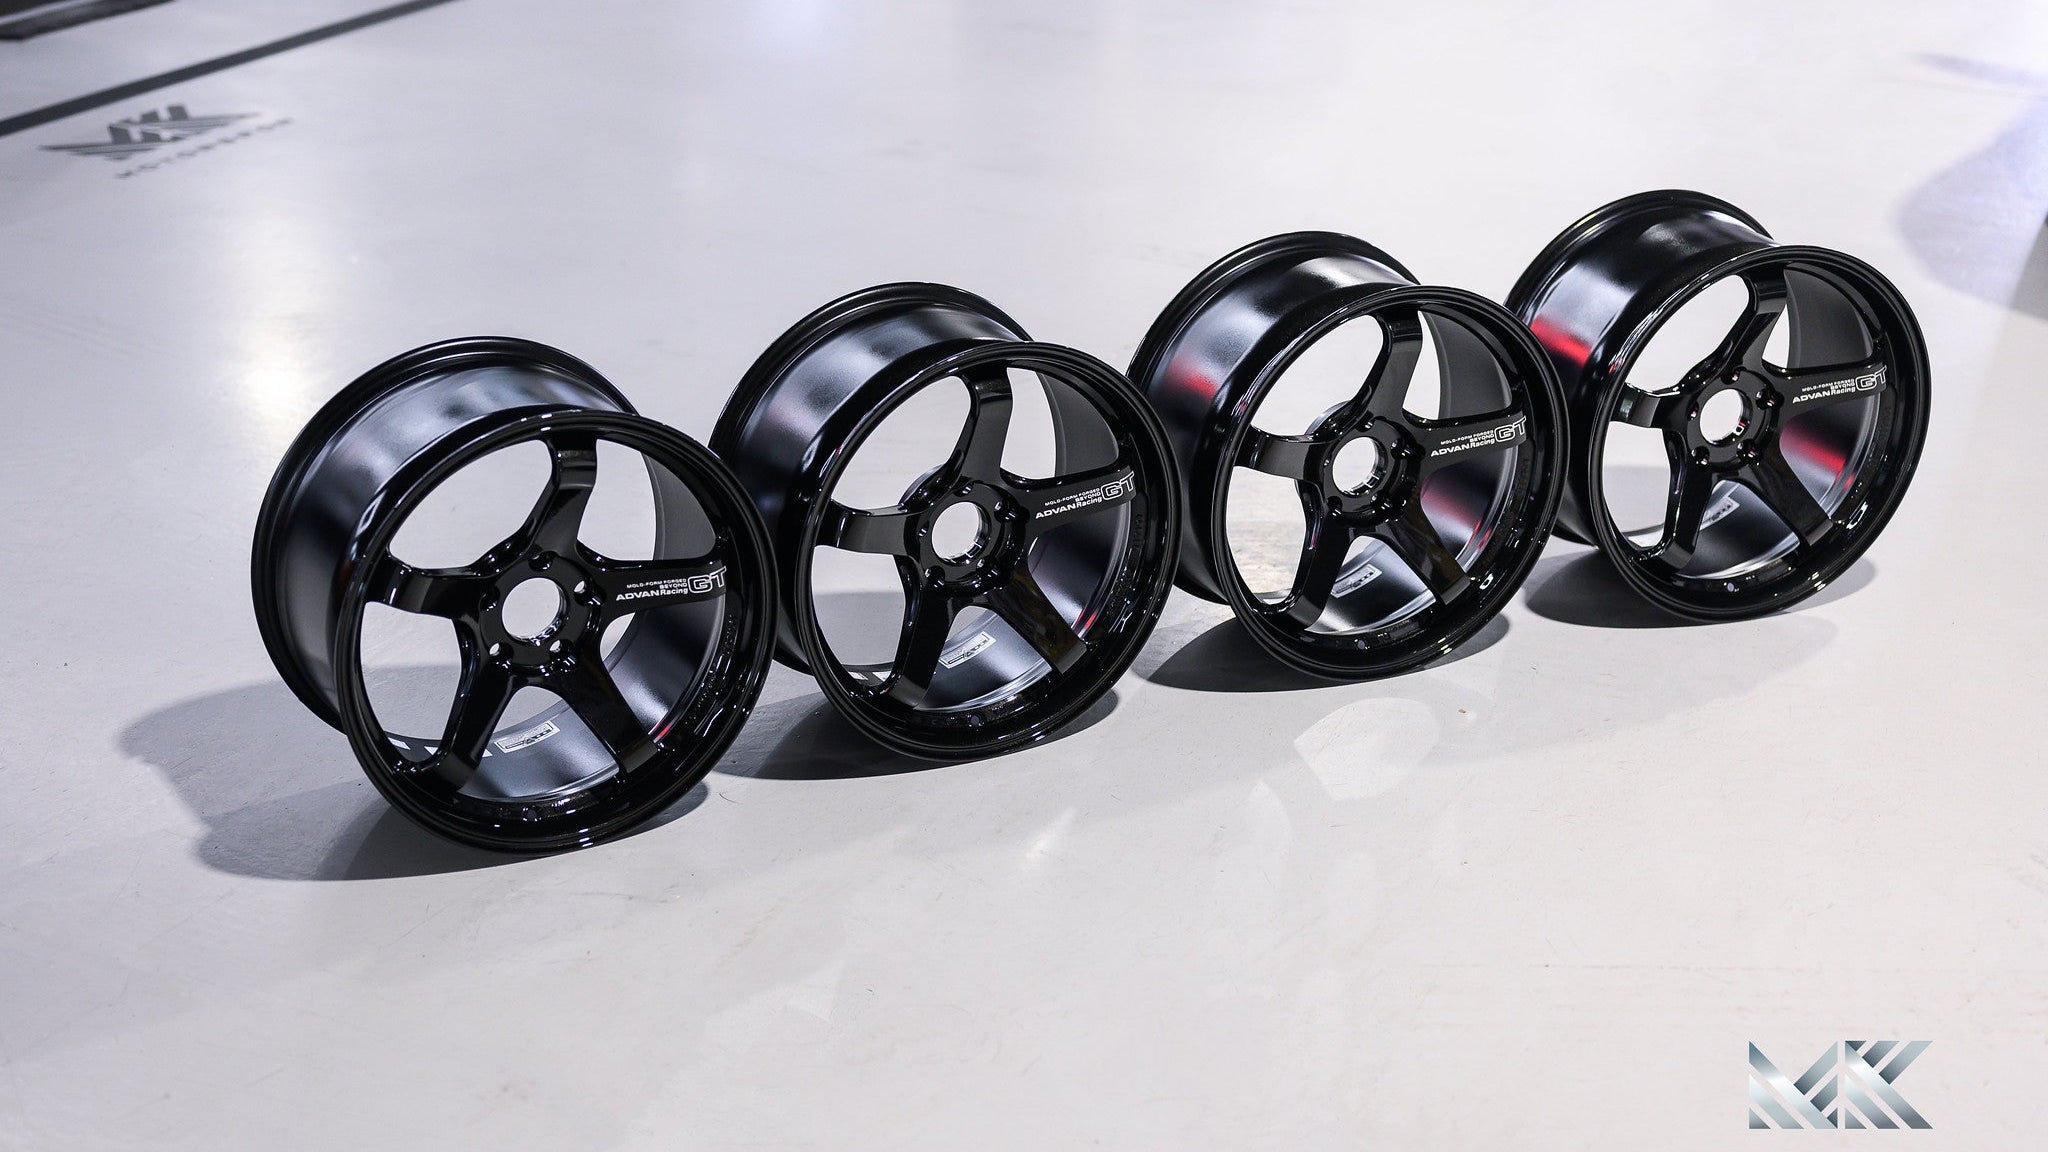 Advan GT Beyond A90 Supra - Premium Wheels from Advan Racing - From just $4790.00! Shop now at MK MOTORSPORTS